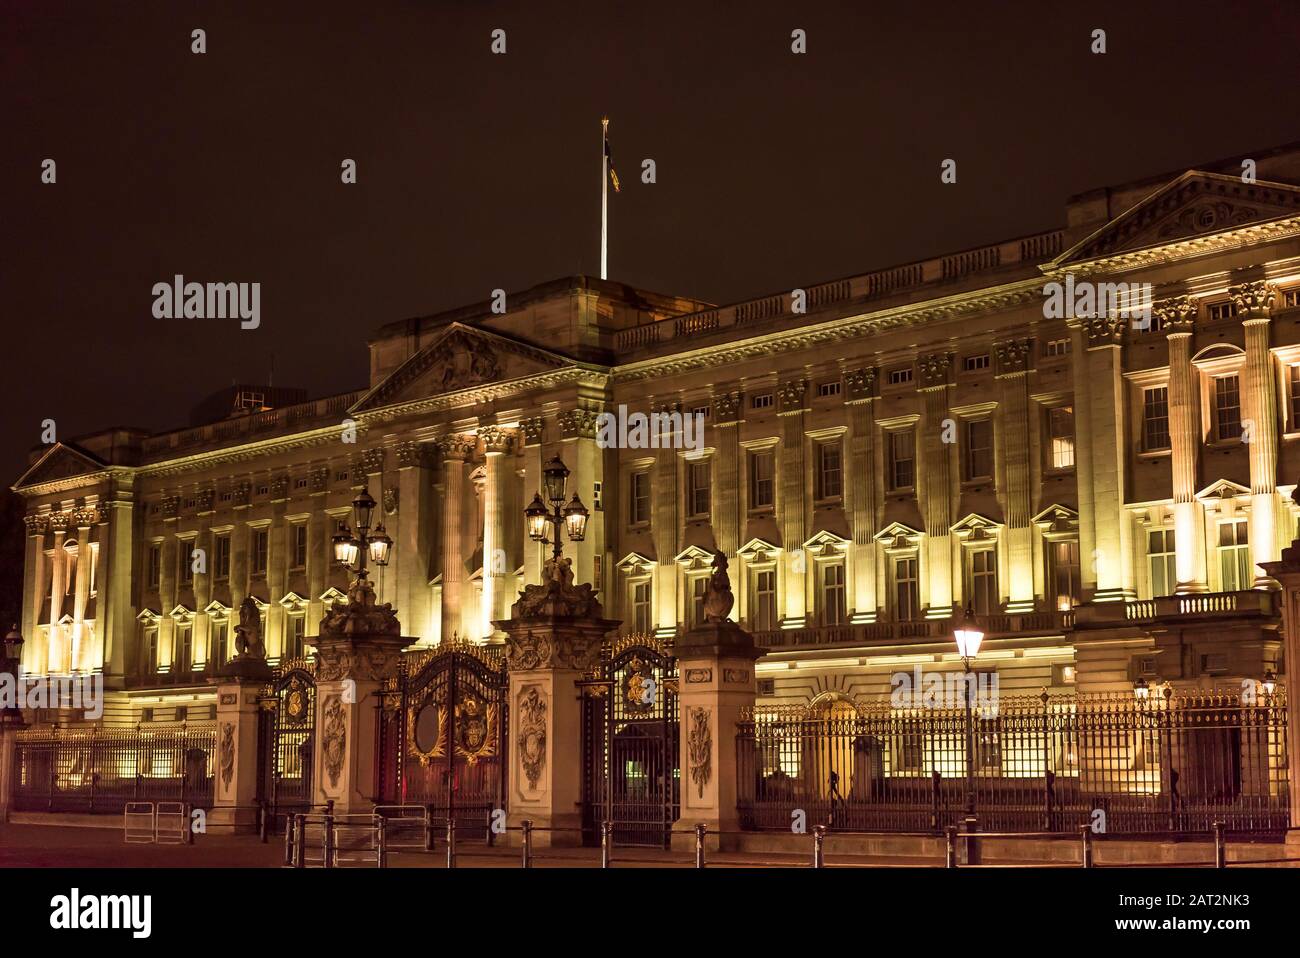 View of famous London landmark Buckingham Palace exterior front facade and royal palace gates, lit up at night on a cold, November evening. Stock Photo